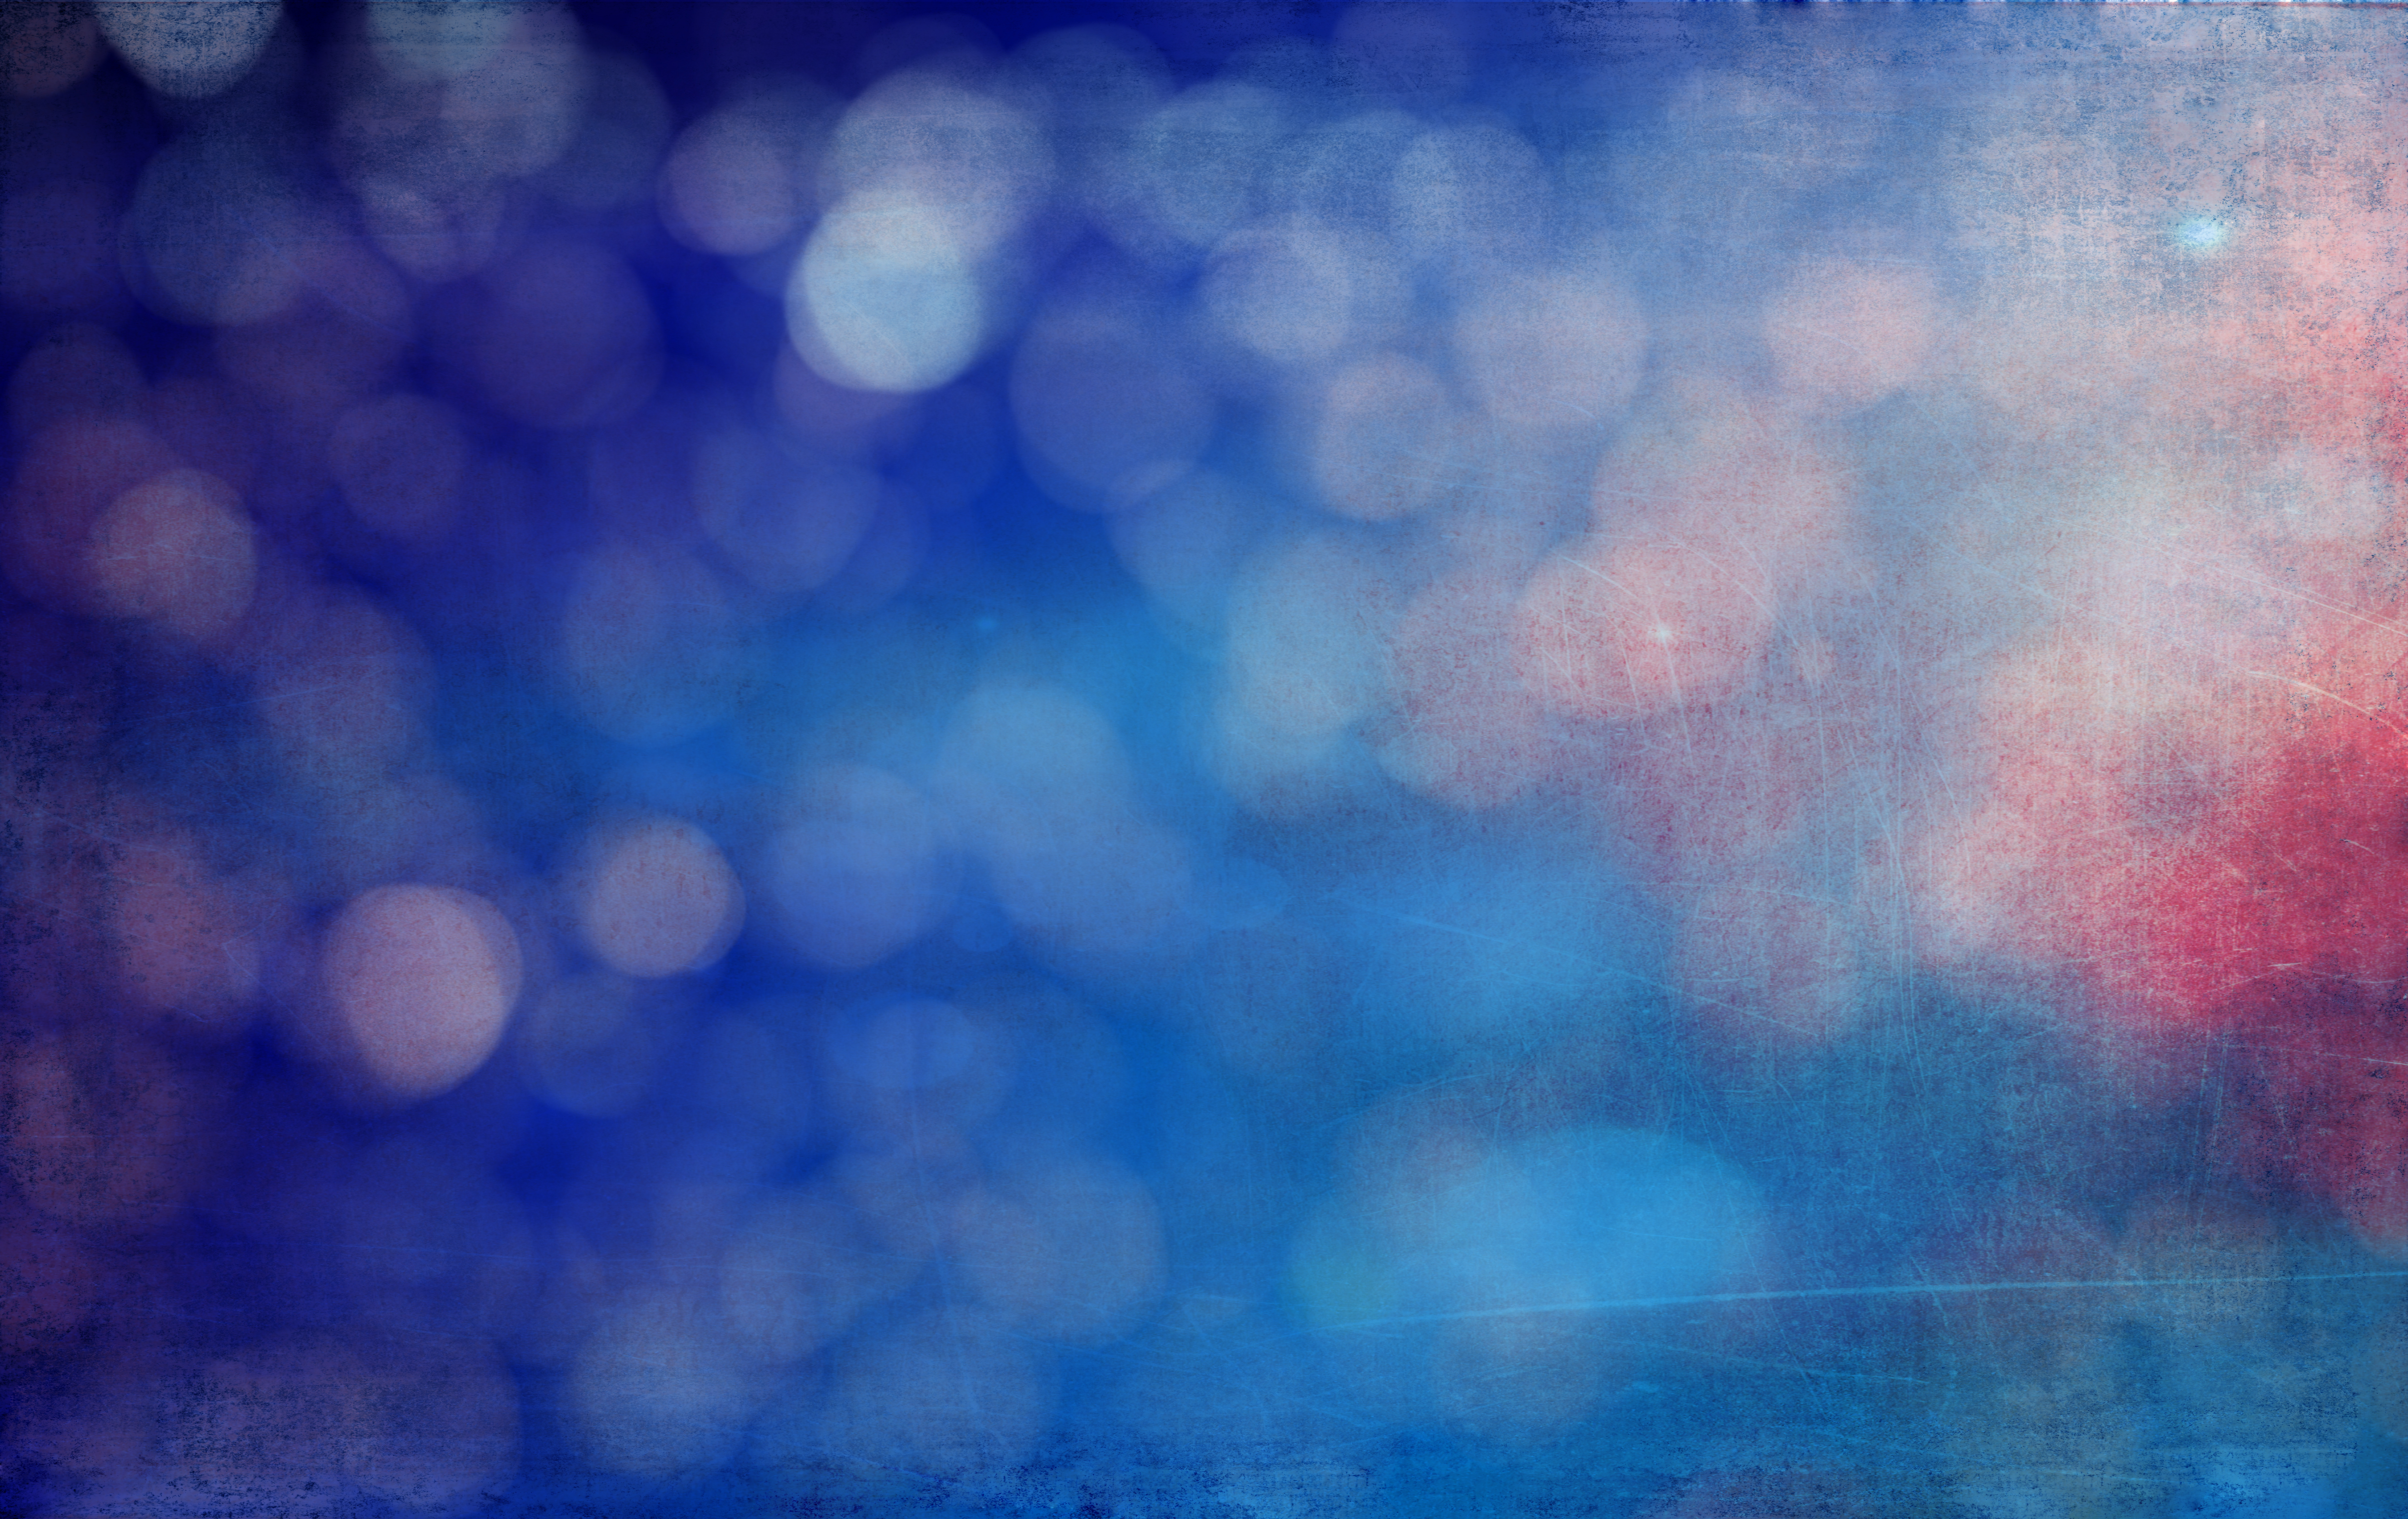 Abstract Textured Background: Blue, Red, And White Patterns. For